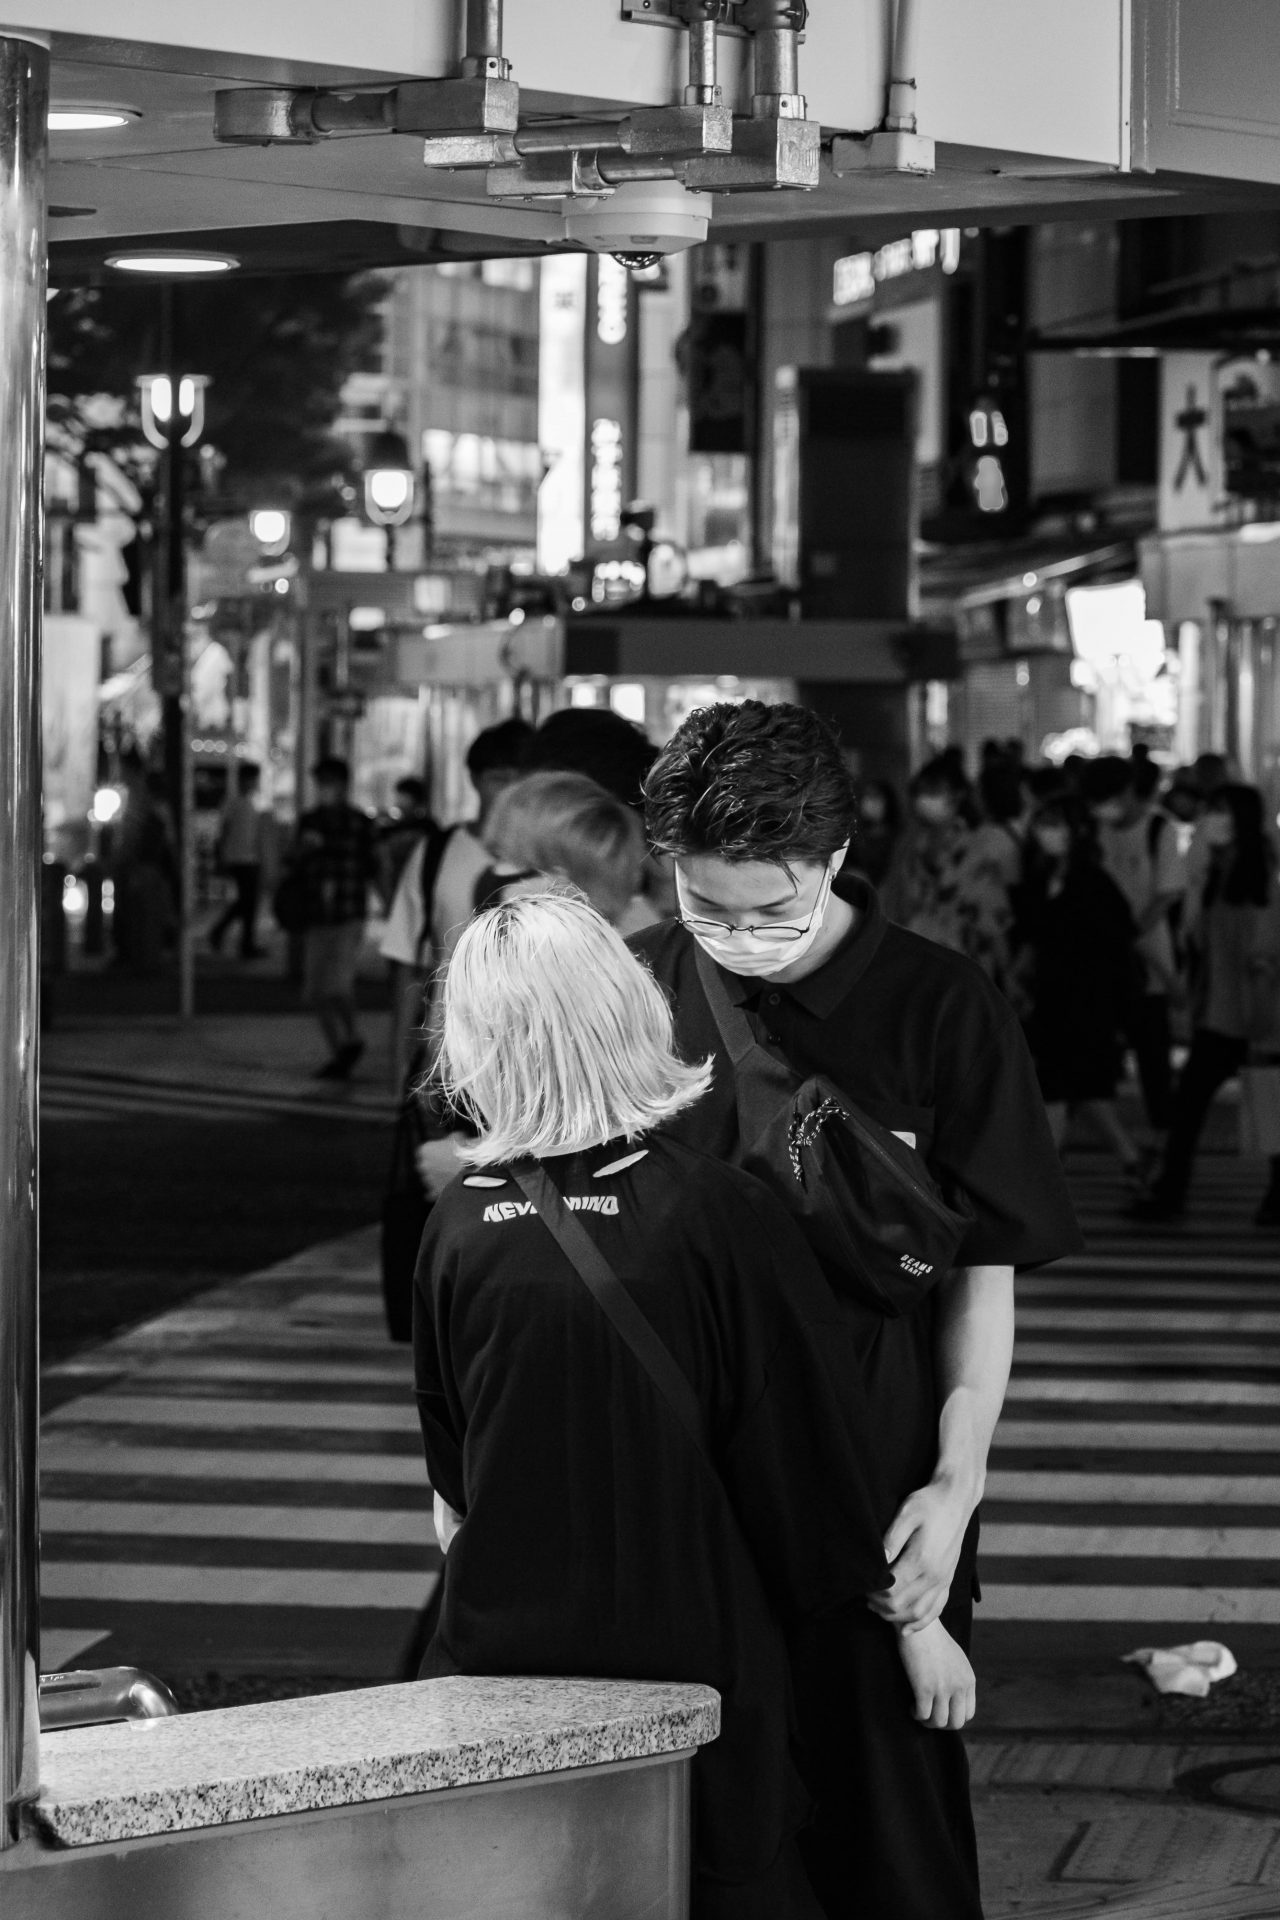 Daily life at Shibuya crossing black and white street photography